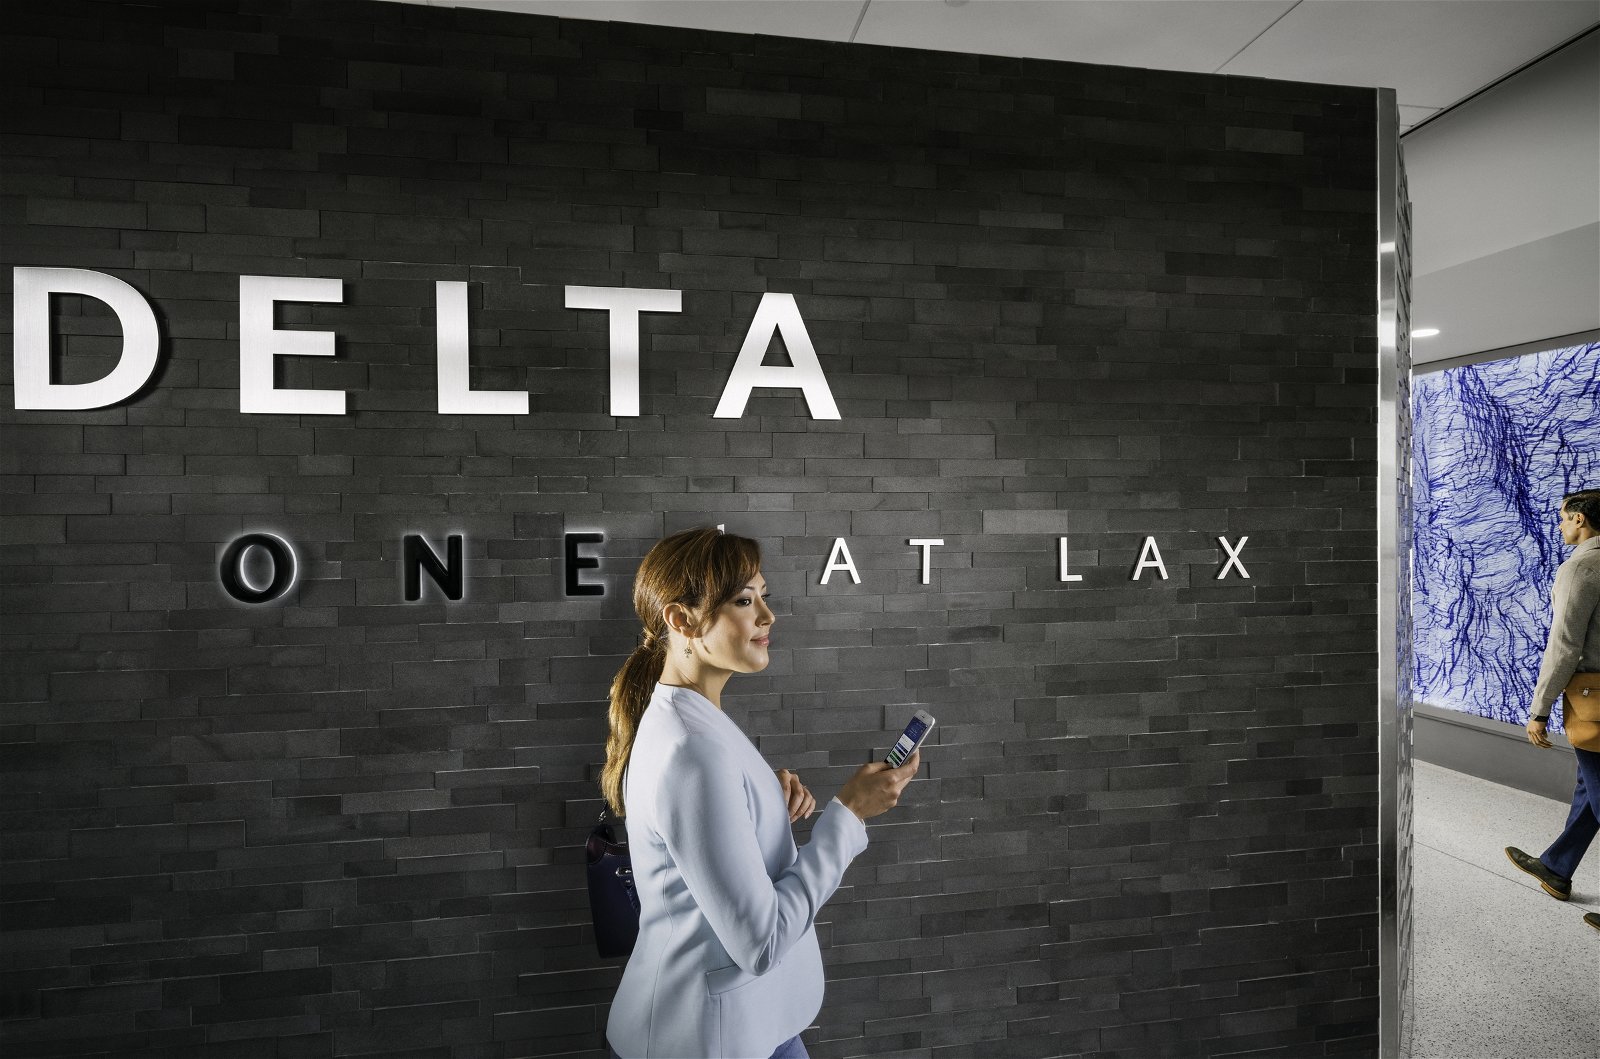 Delta One at LAX Lounge entrance